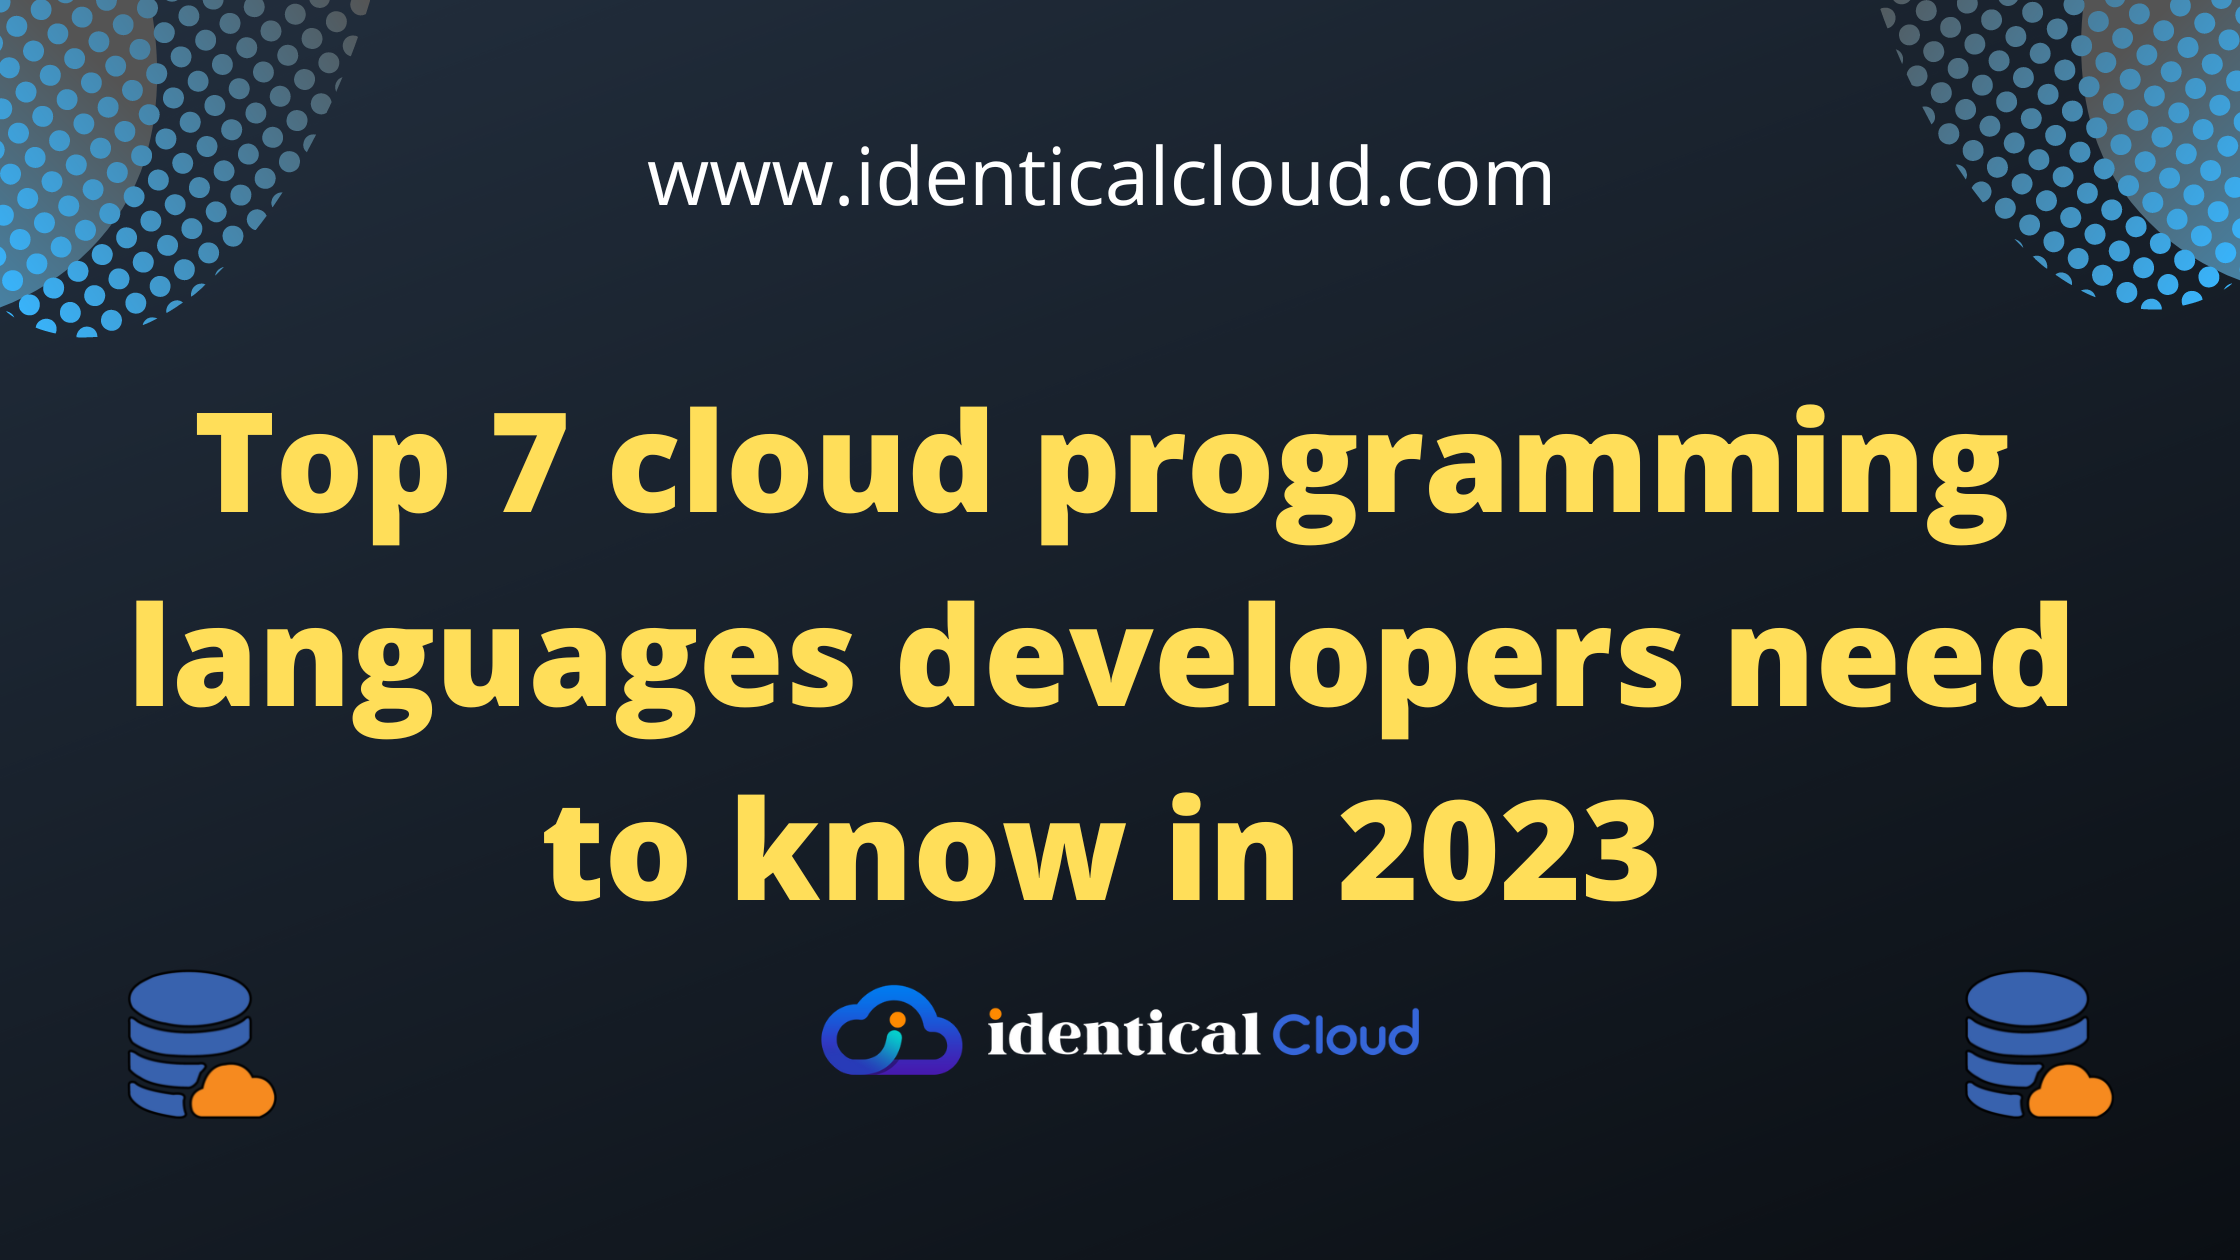 Top 7 cloud programming languages developers need to know in 2023 - identicalcloud.com